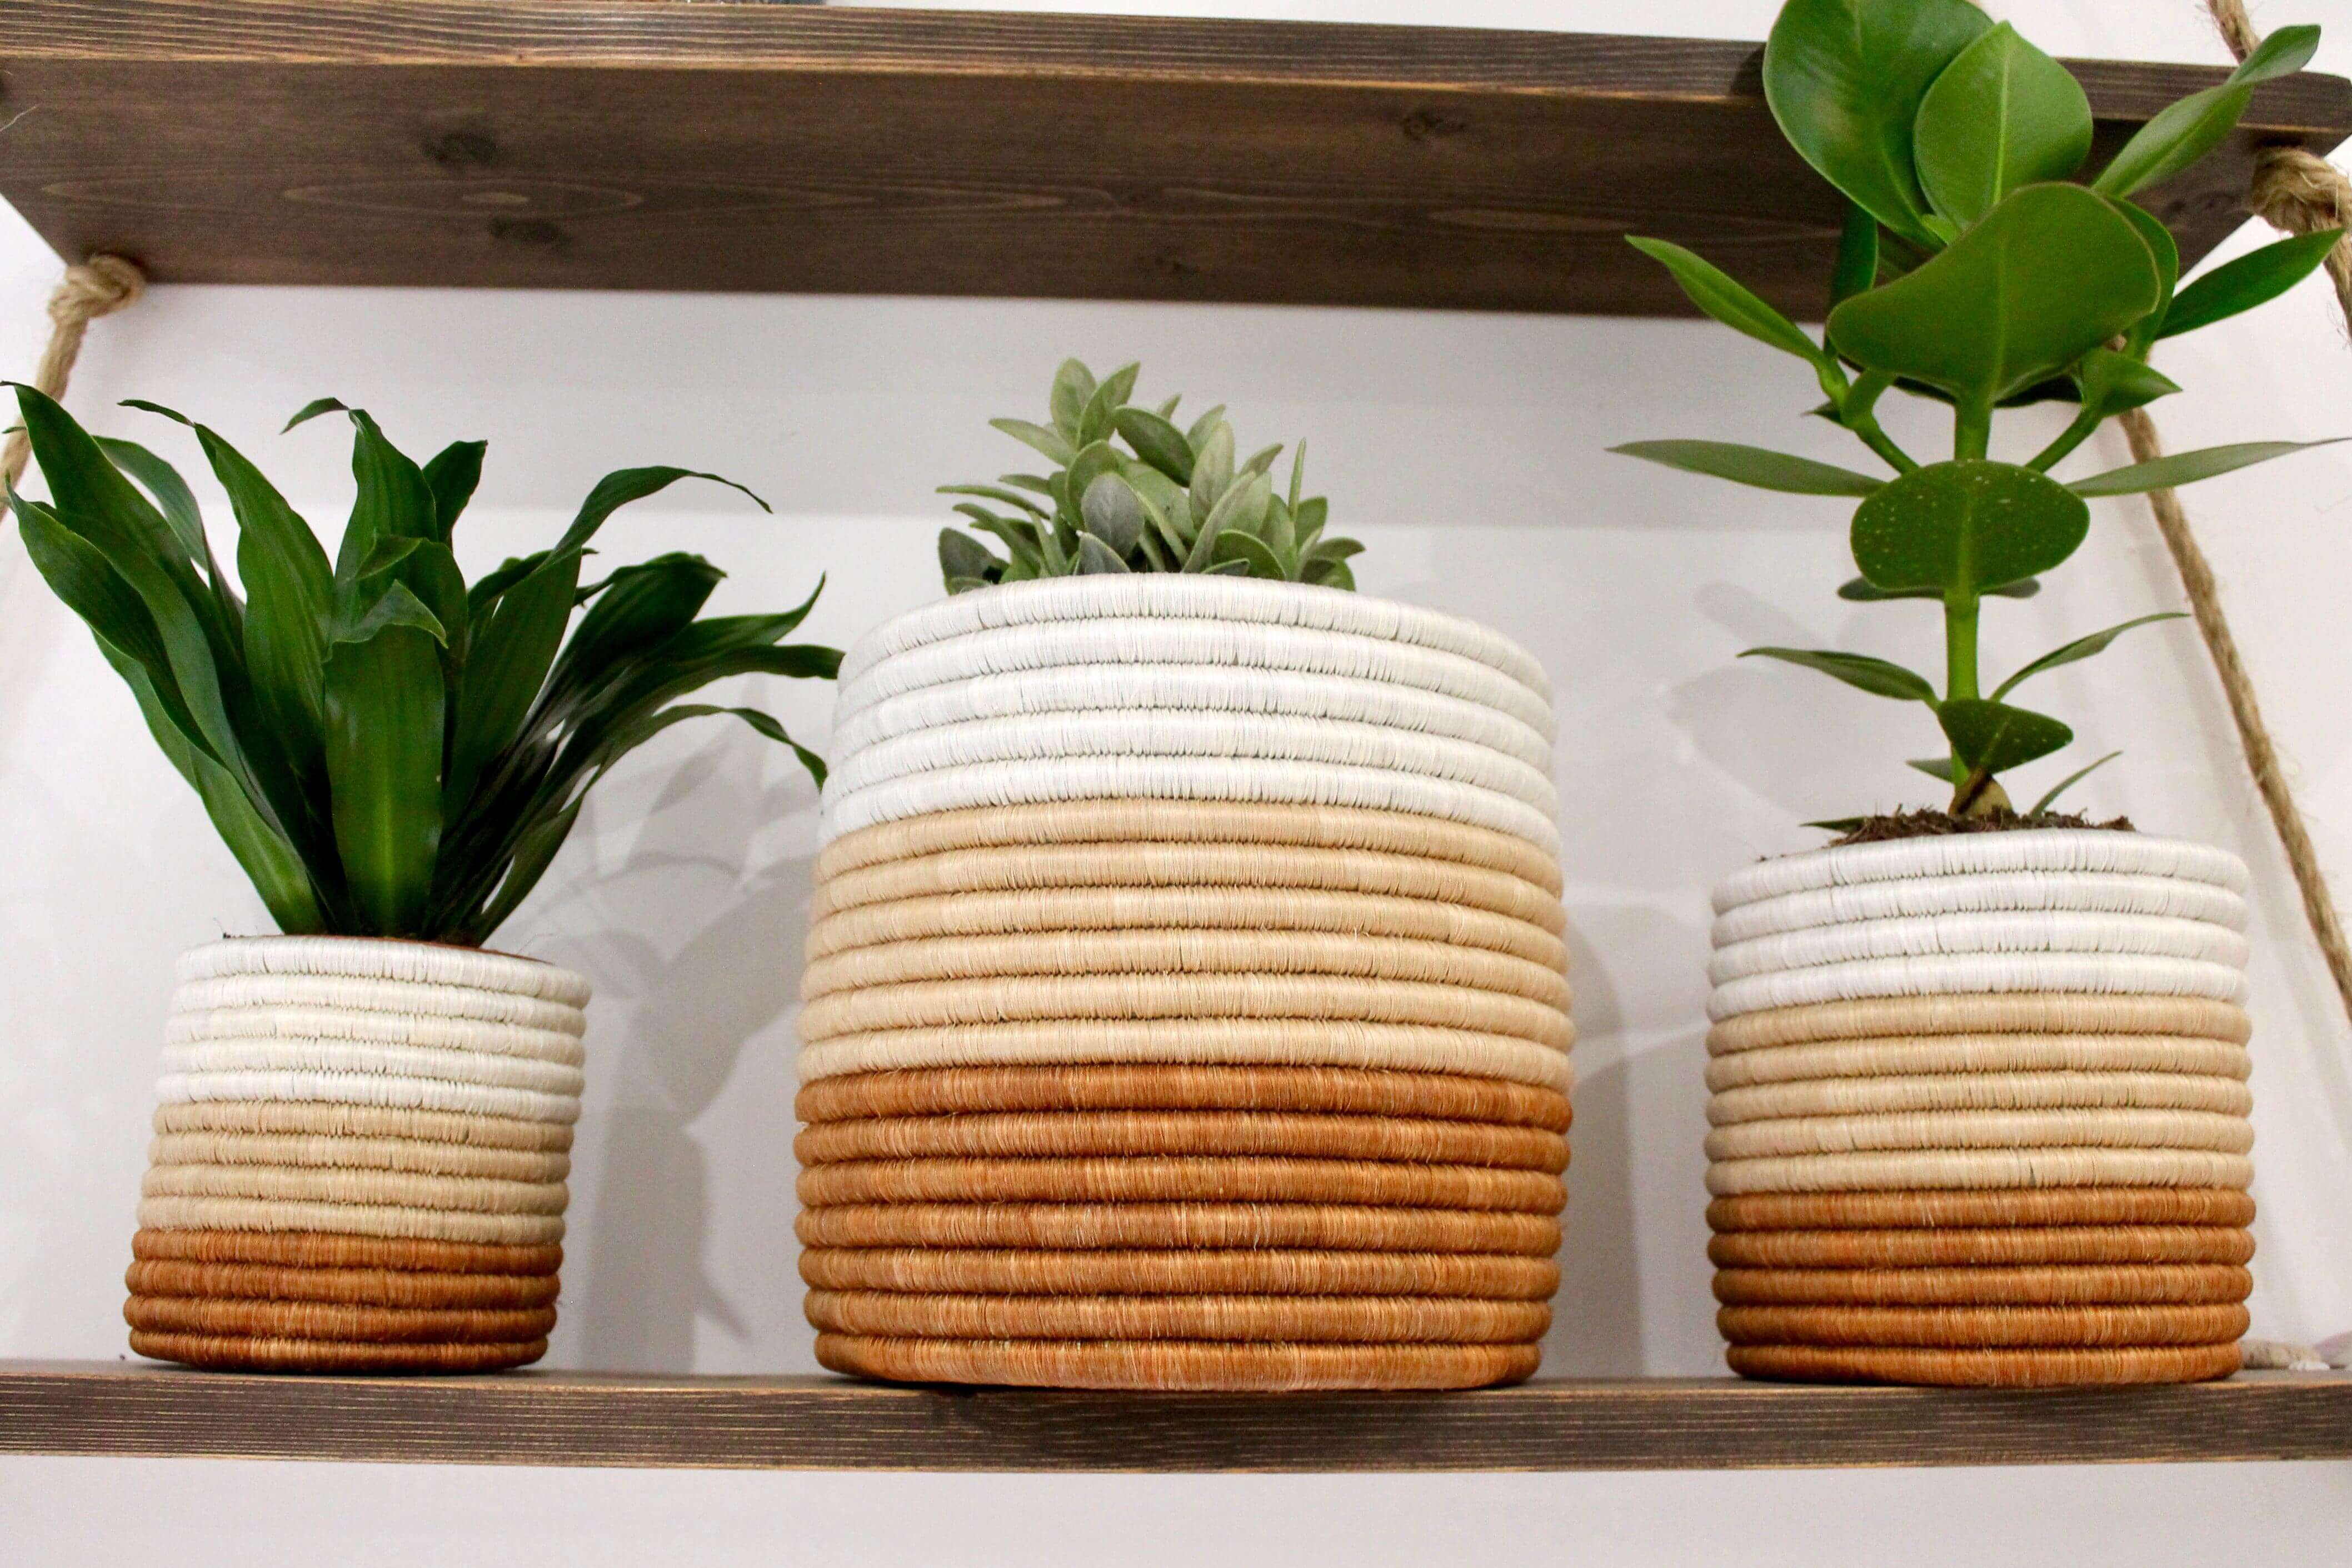 Set of 3 handwoven African plant pots rust and white coloured